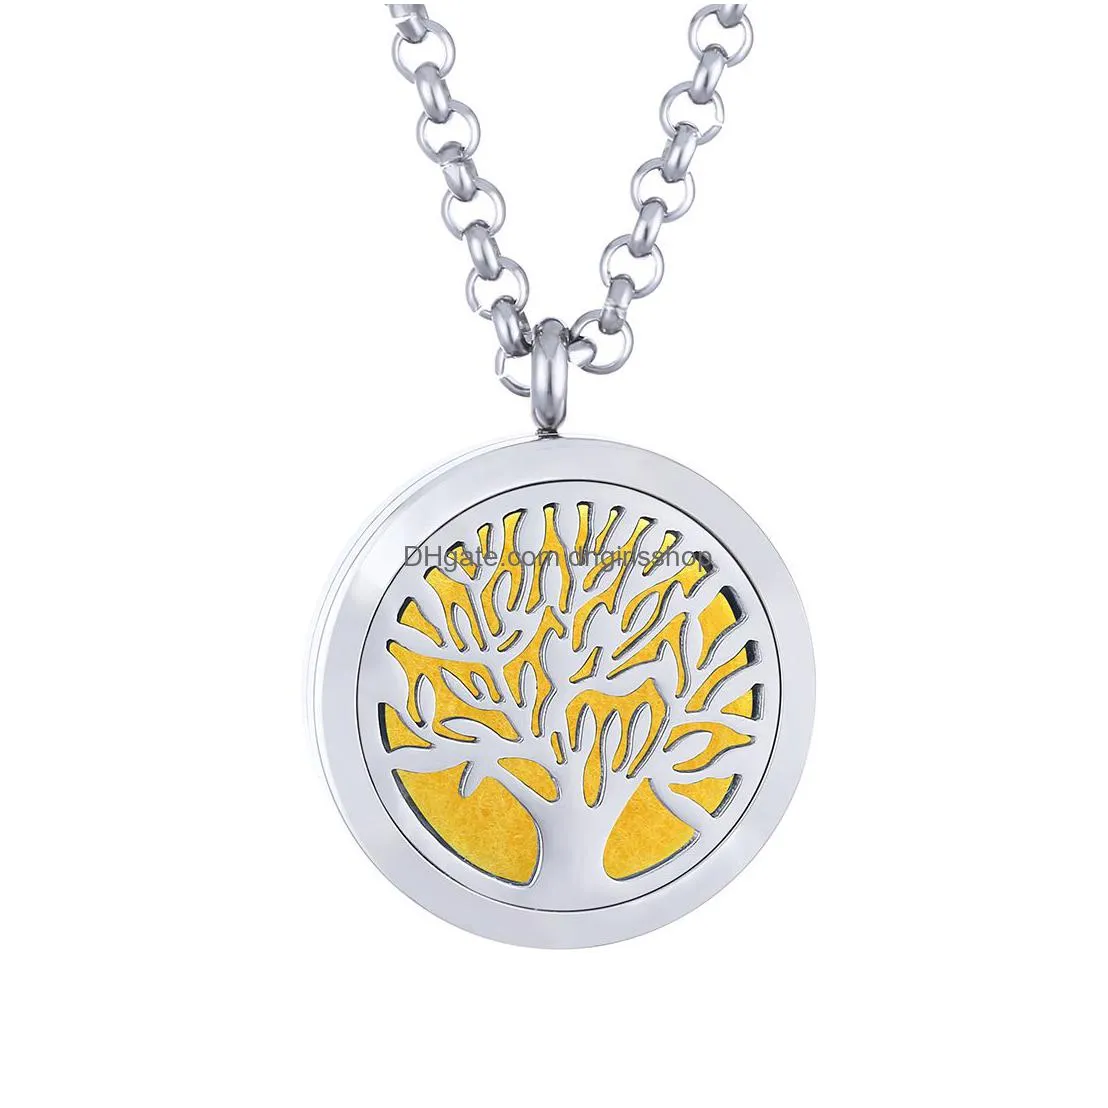 high quality aromatherapy  oil diffuser pendant necklaces stainless steel chain tree of life floating locket necklace for